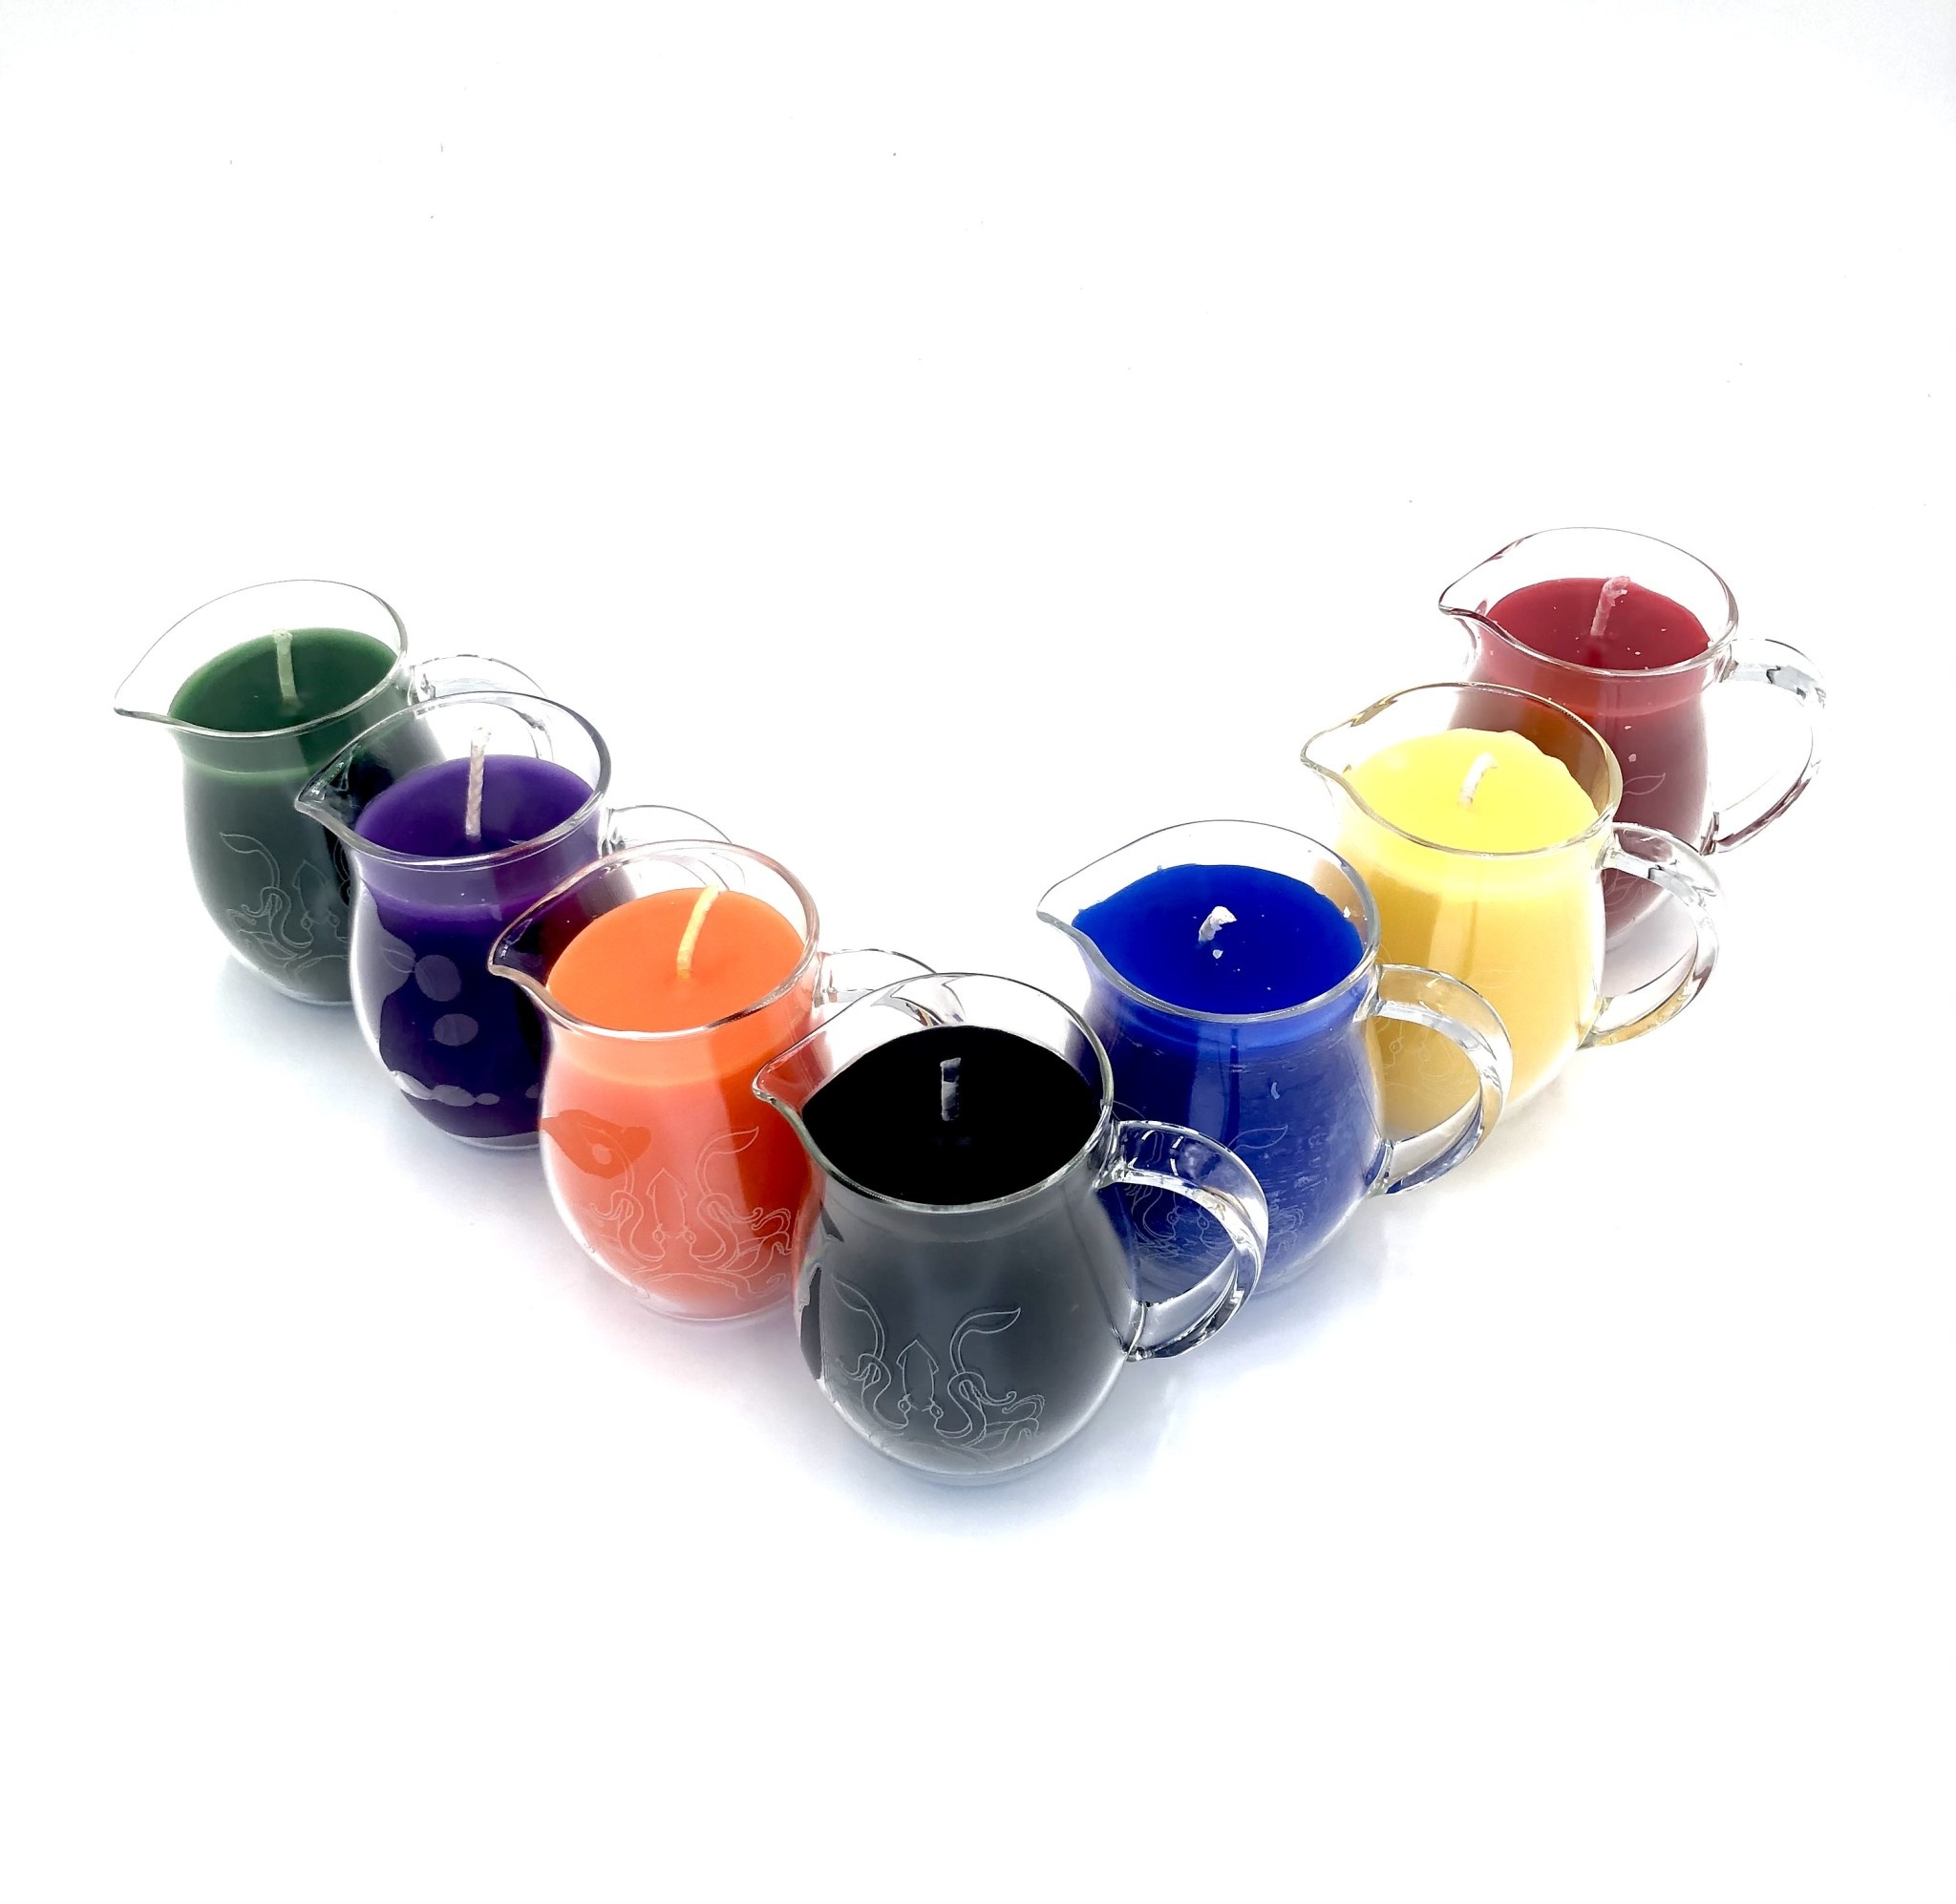 Wax Play Pitcher Candle by Agreeable Agony